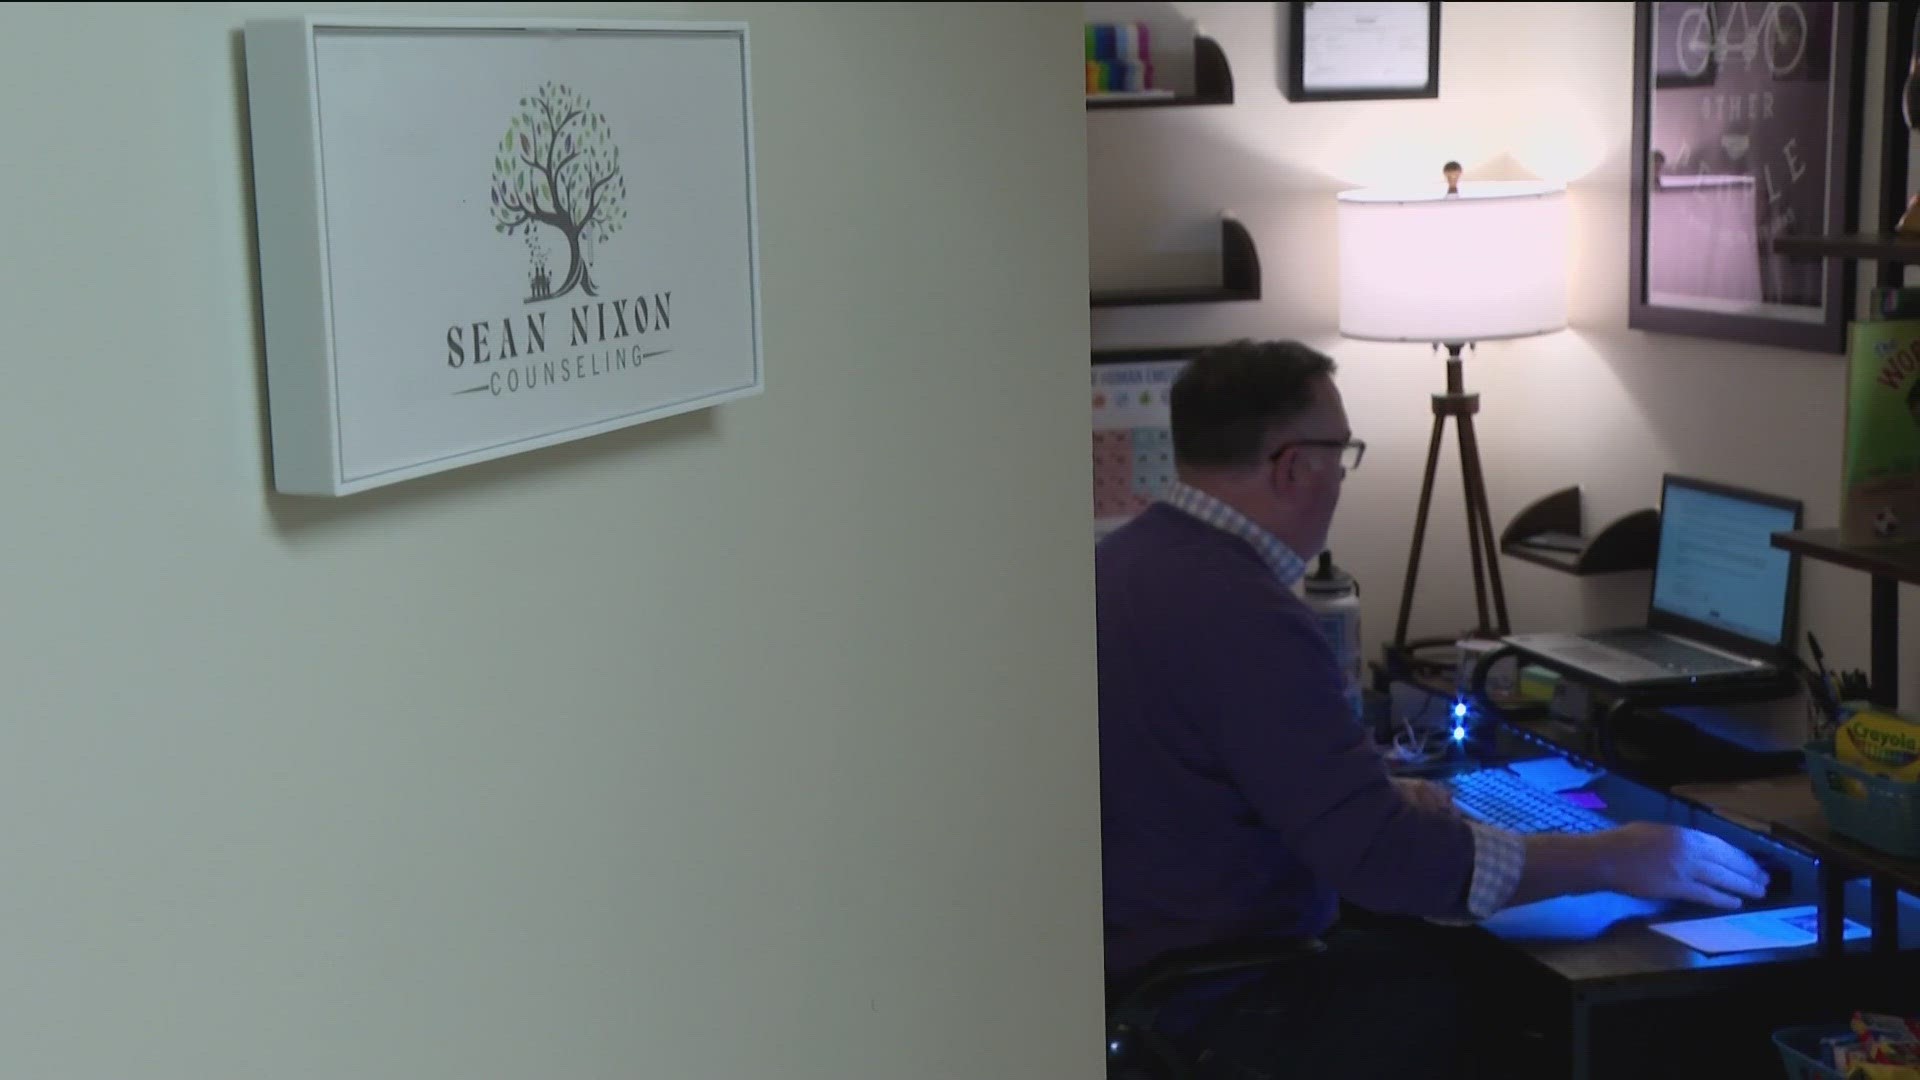 Are religious beliefs keeping counselors from helping patients? Some lawmakers think they should be able to. The 208 team gets the perspective of a local therapist.